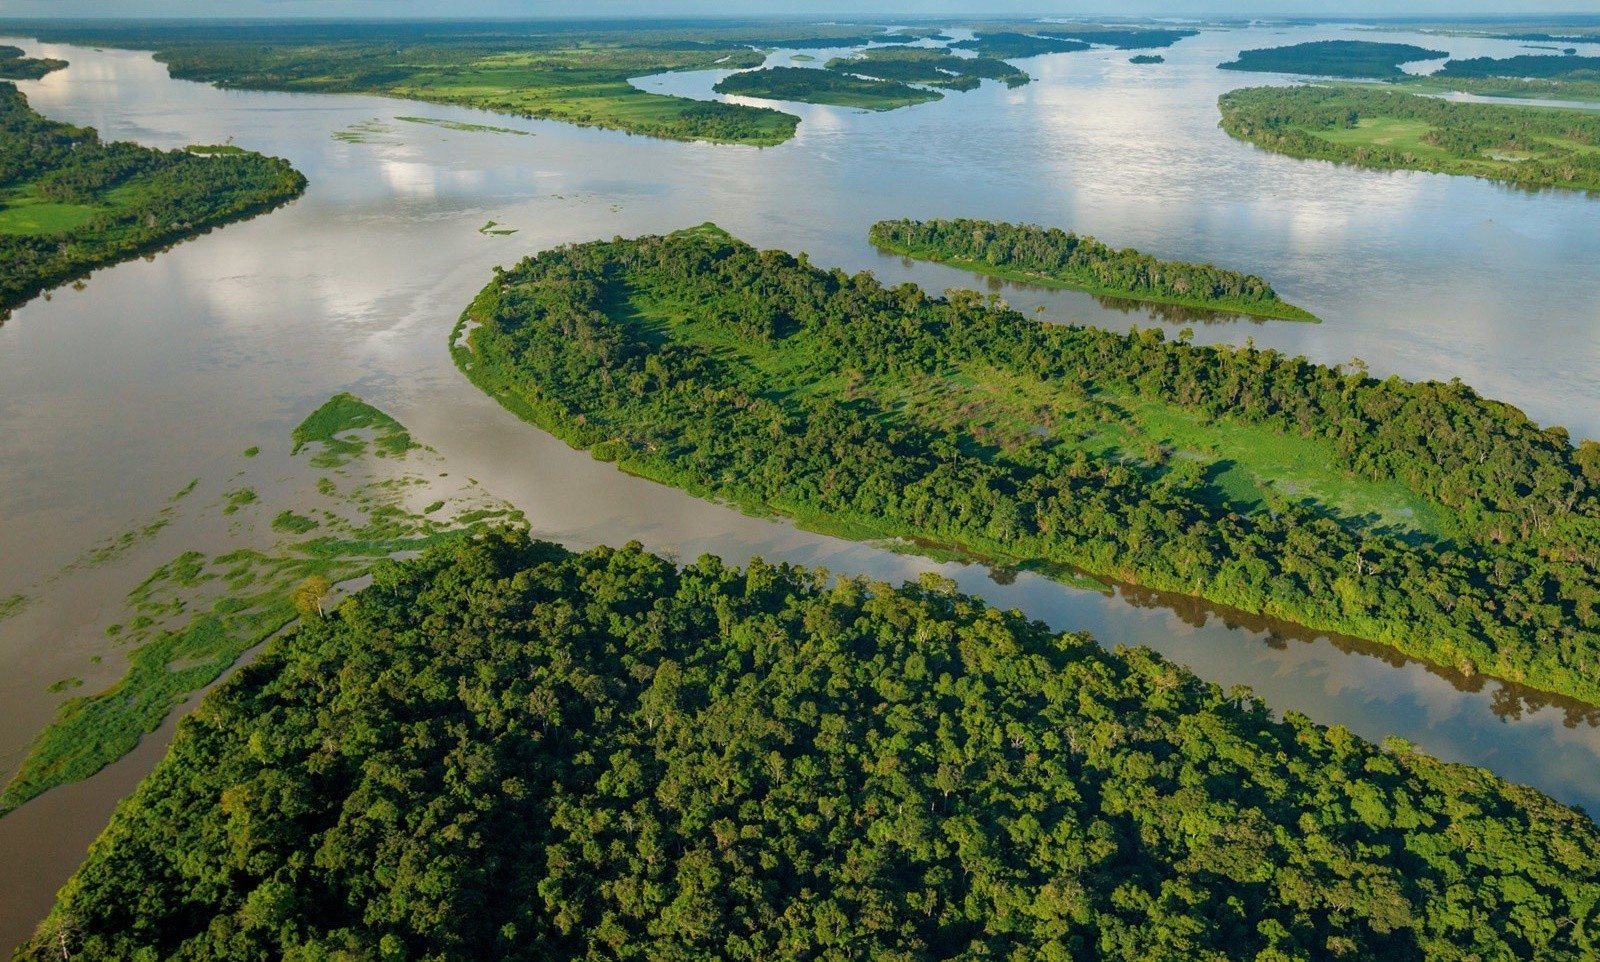 Congo River: The Deepest River In The World